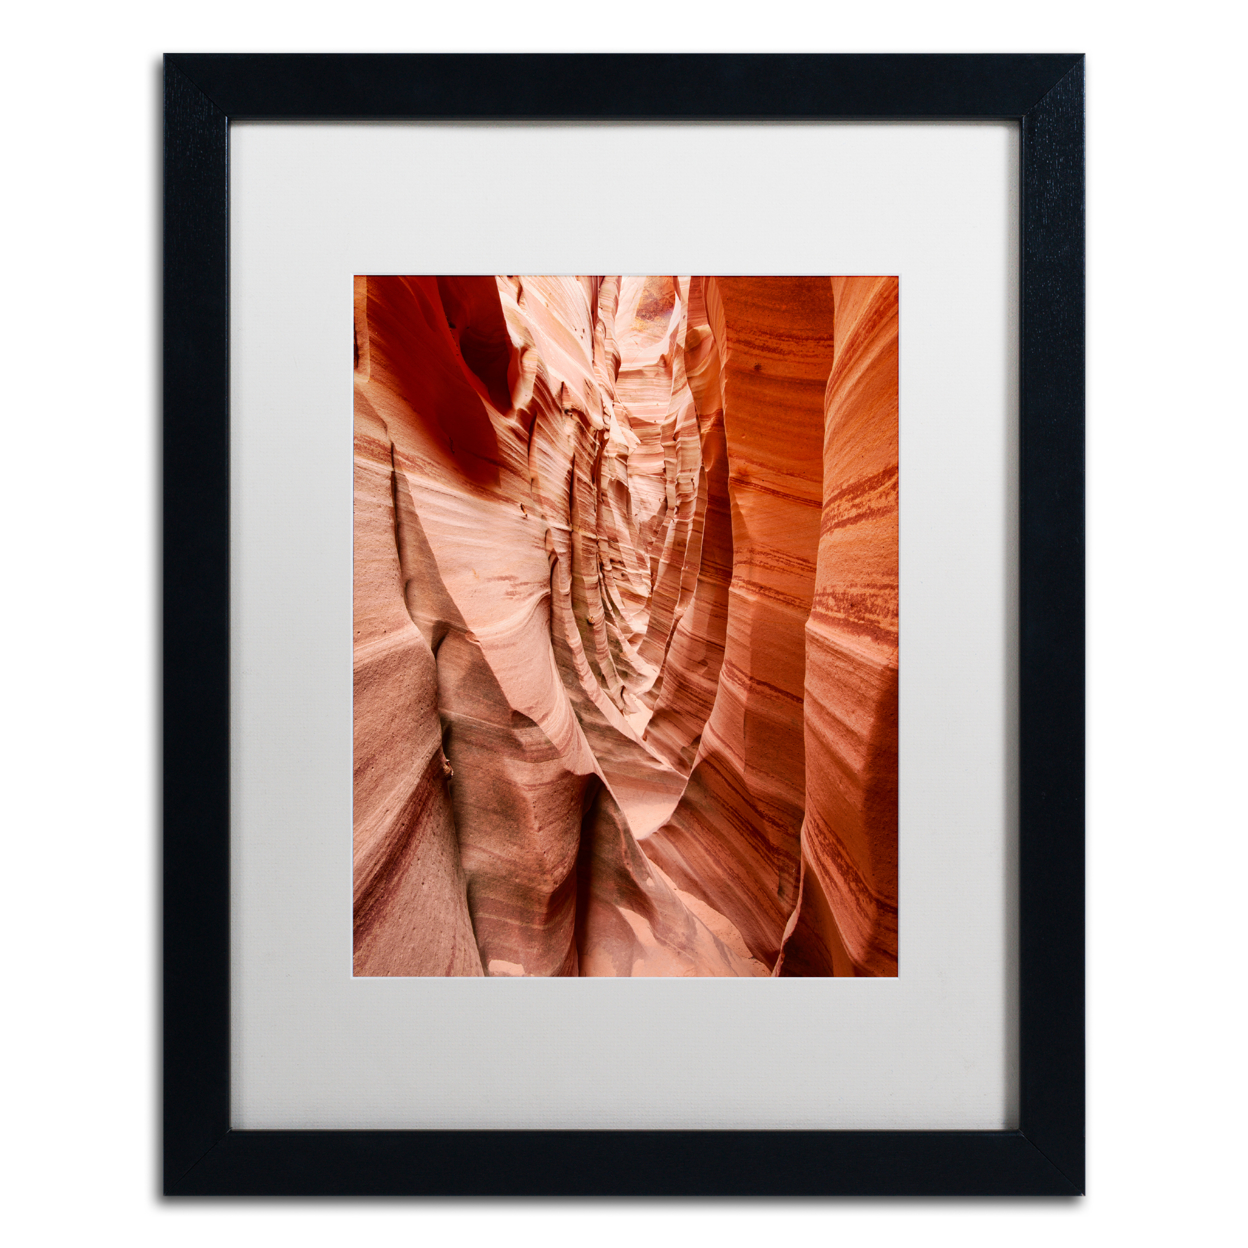 Michael Blanchette Photography 'Sandstone Buttress' Black Wooden Framed Art 18 X 22 Inches